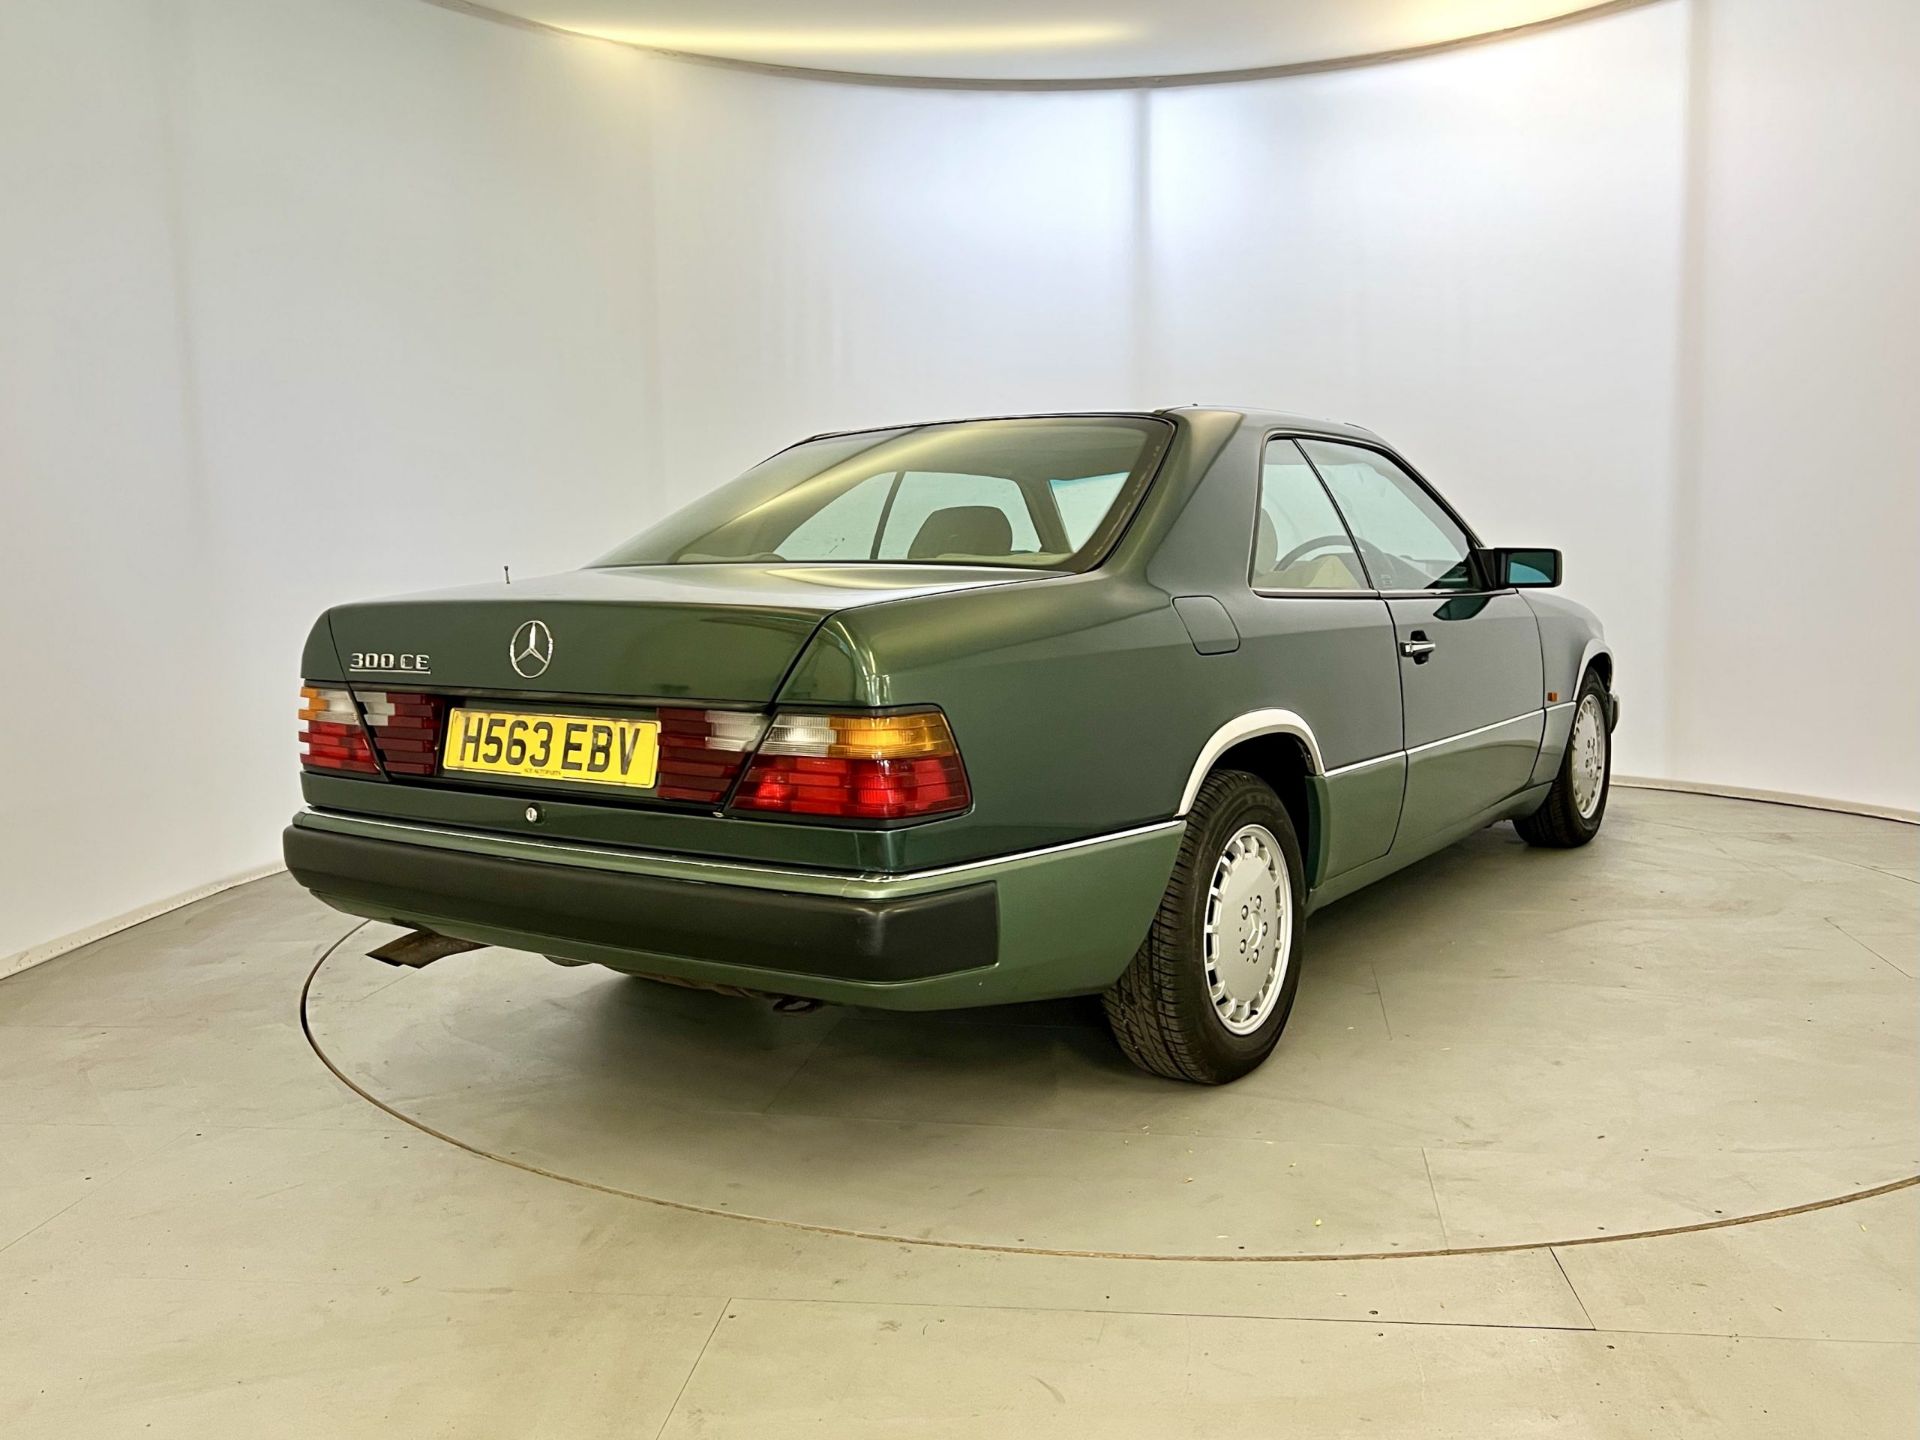 Mercedes 300CE - Image 9 of 30